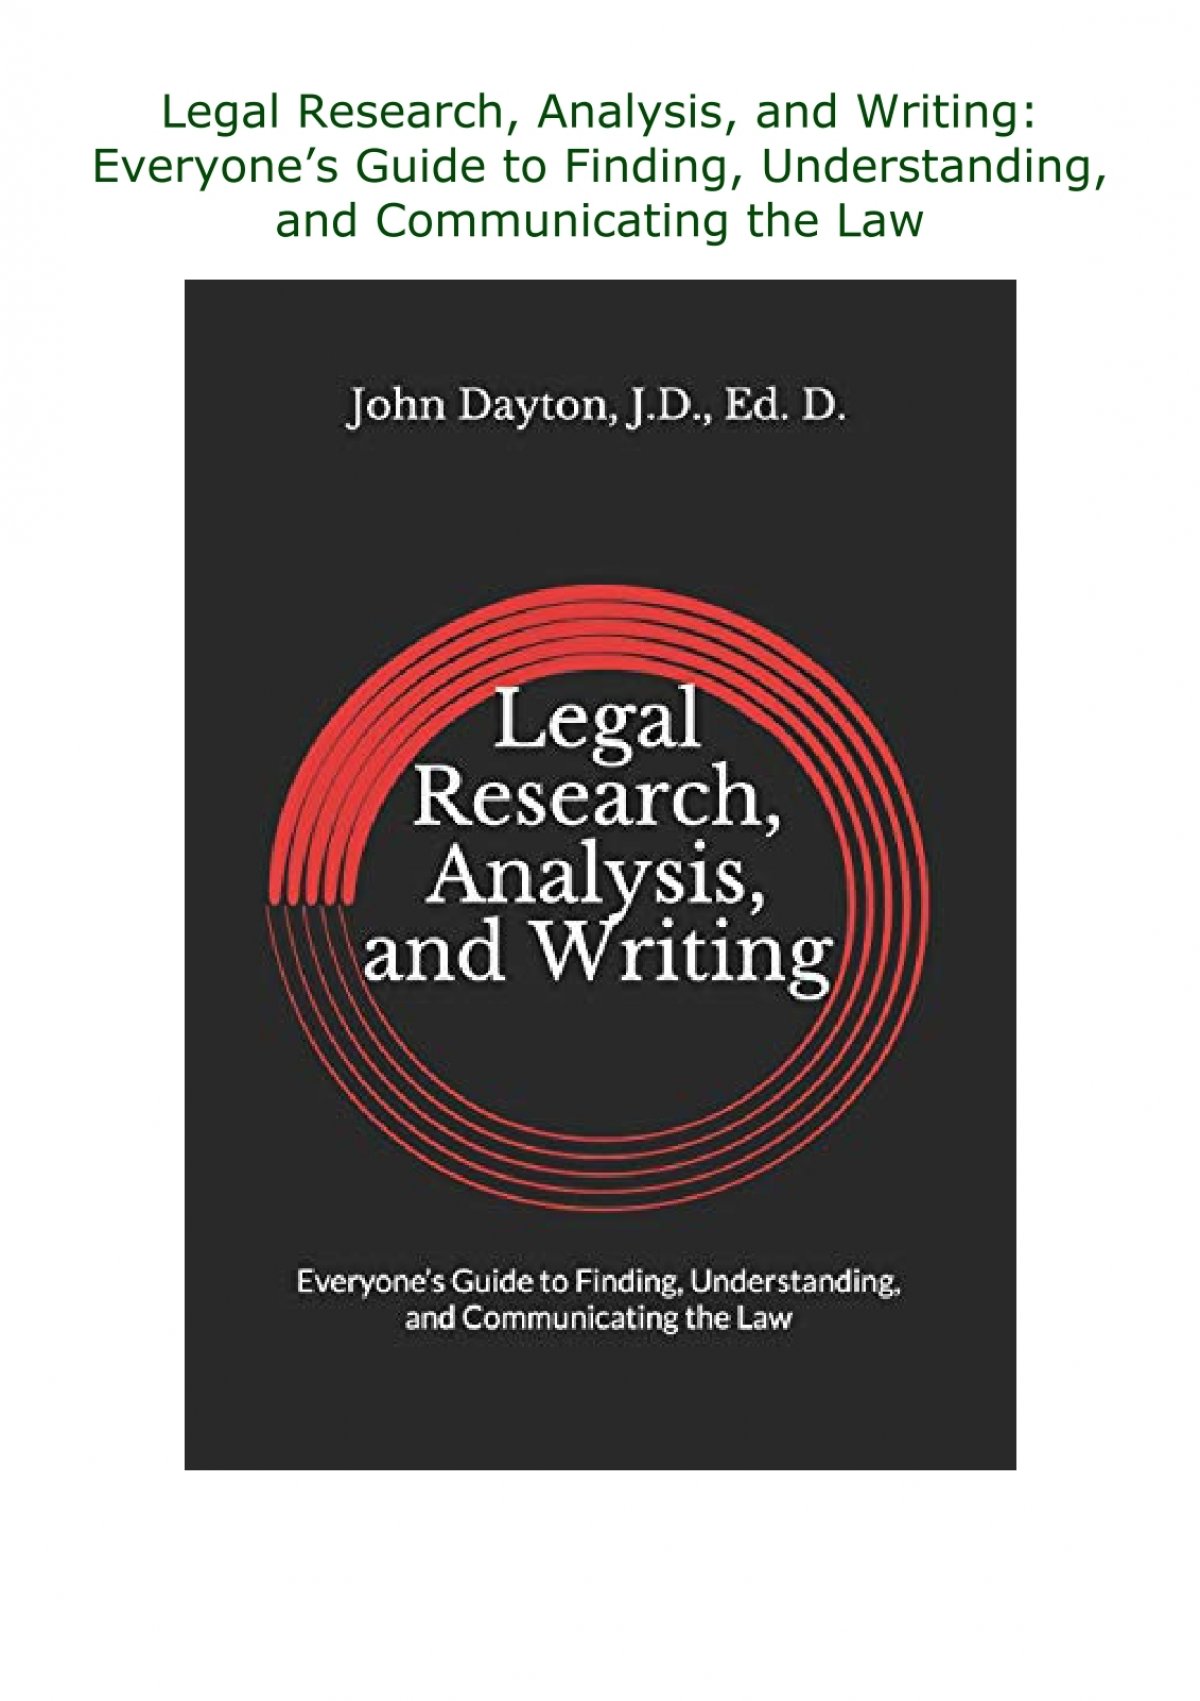 legal research analysis and writing 6th edition pdf free